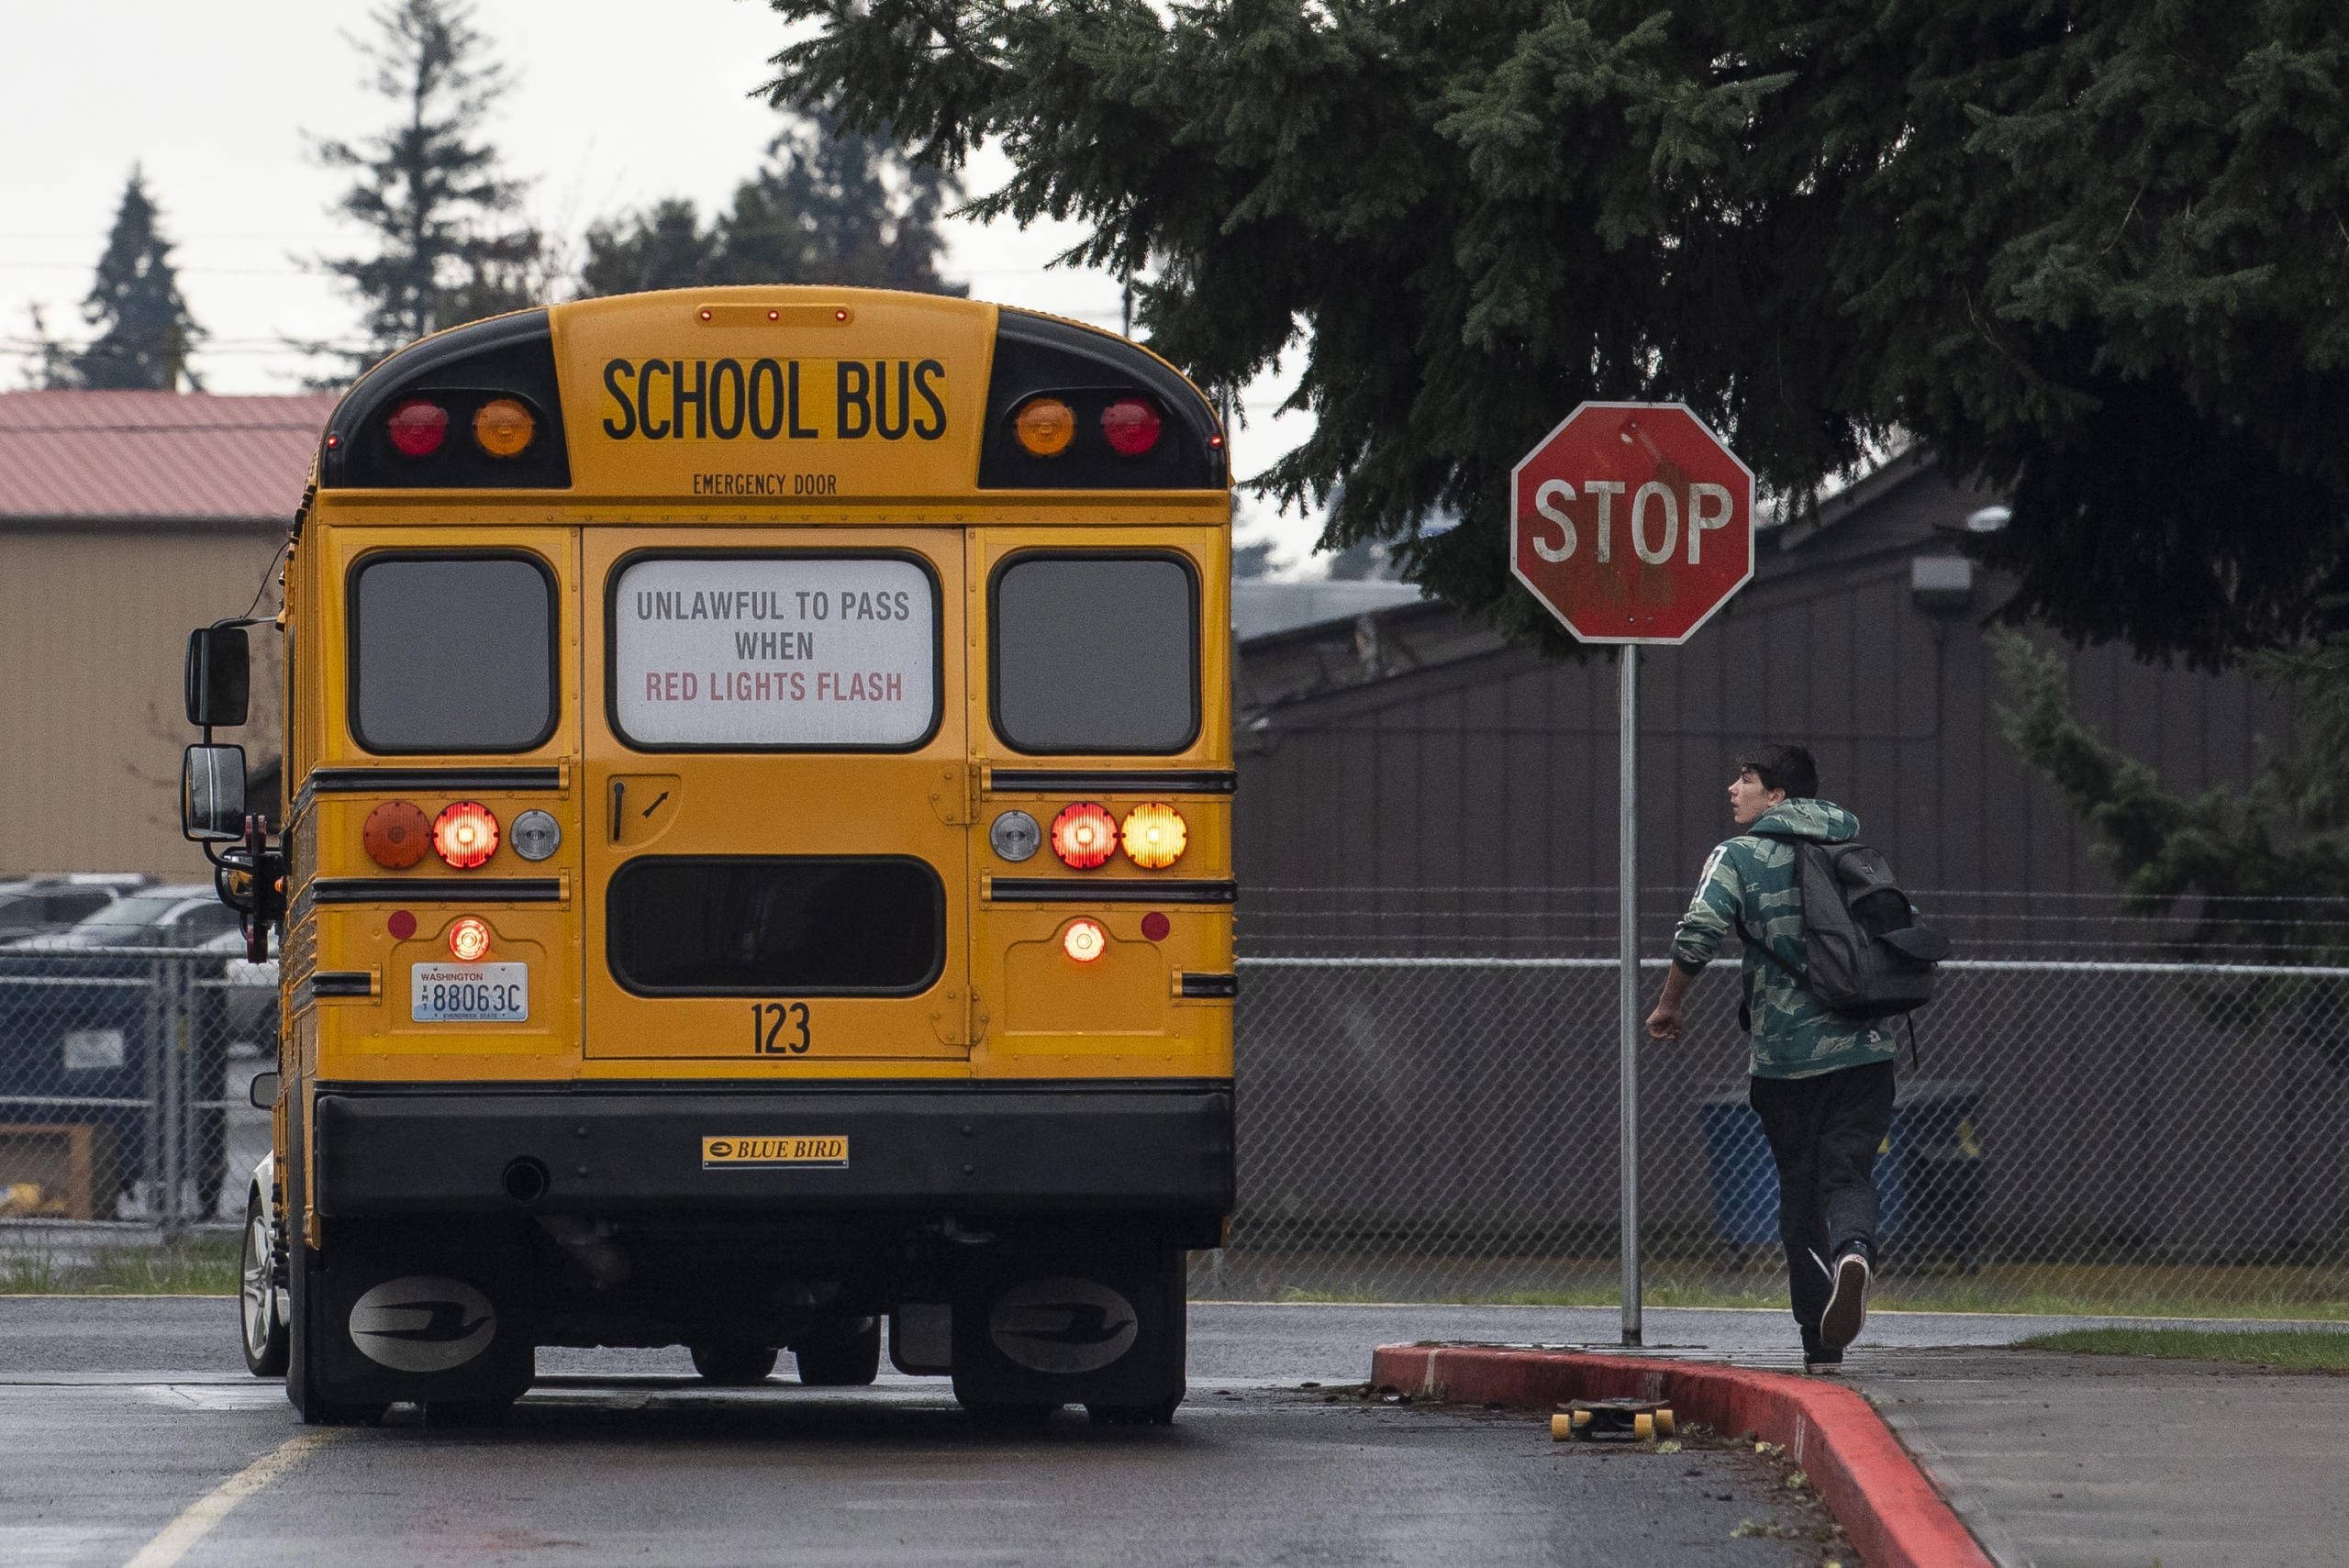 Owen Watt runs along side a school bus filled with fellow students as it pulls away from Covington Middle School on Friday afternoon, March 13, 2020.